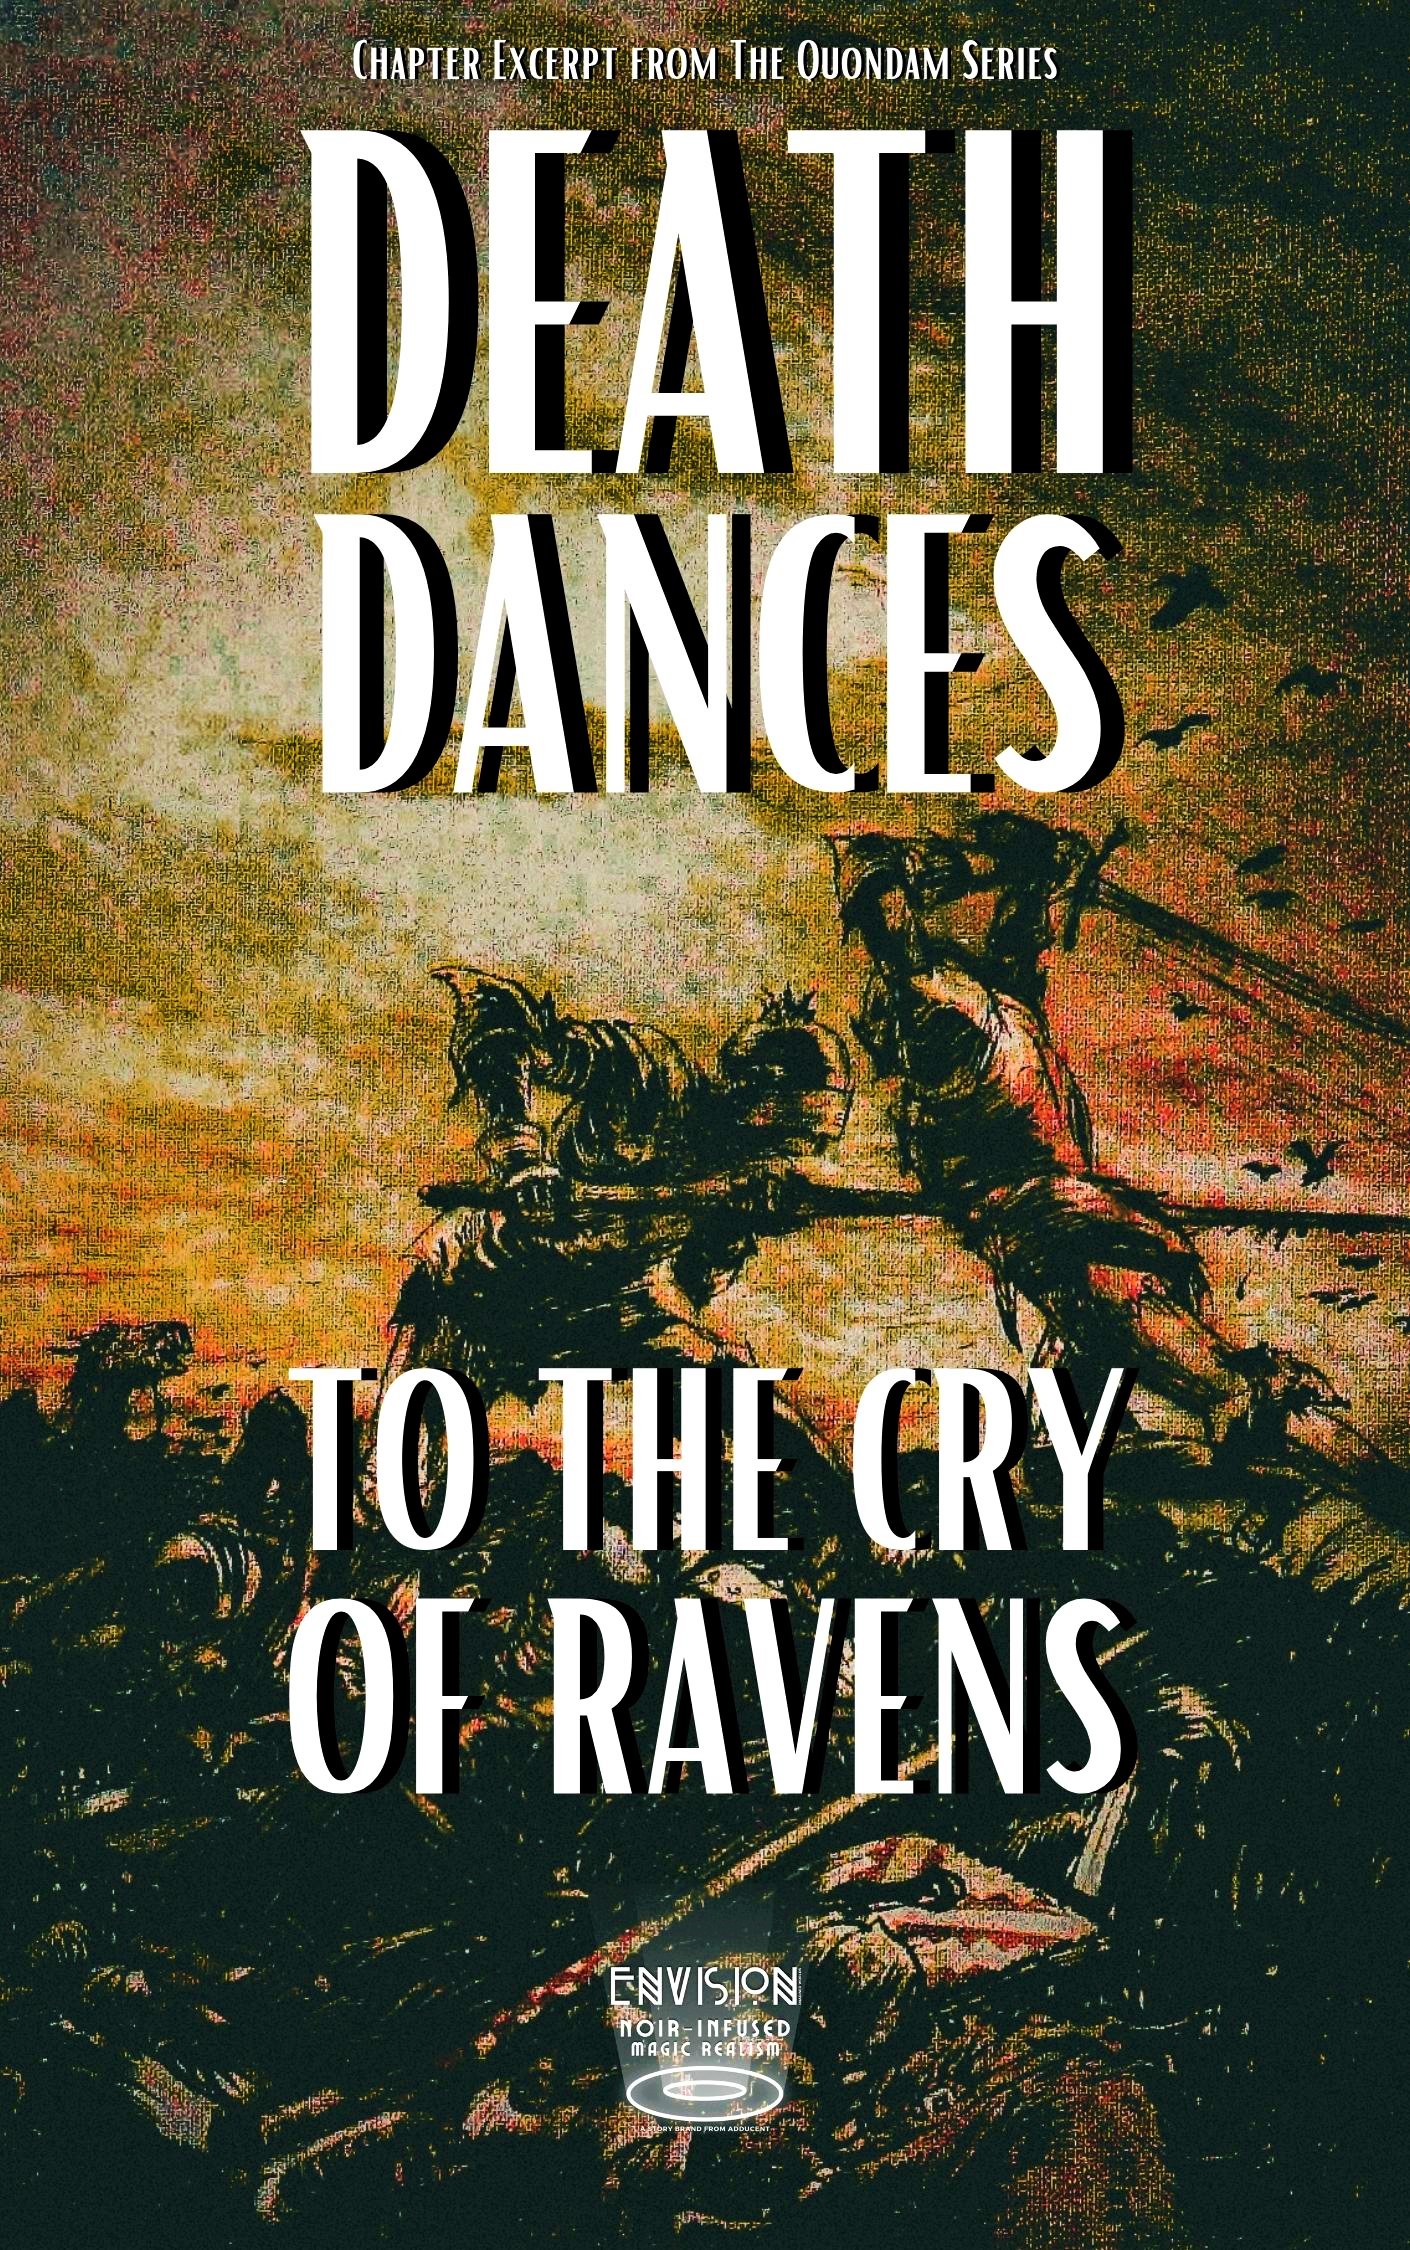 DEATH DANCES to the Cry of Ravens (Chapter Excerpt from Quondam Series) Fiction by Dennis Lowery. 